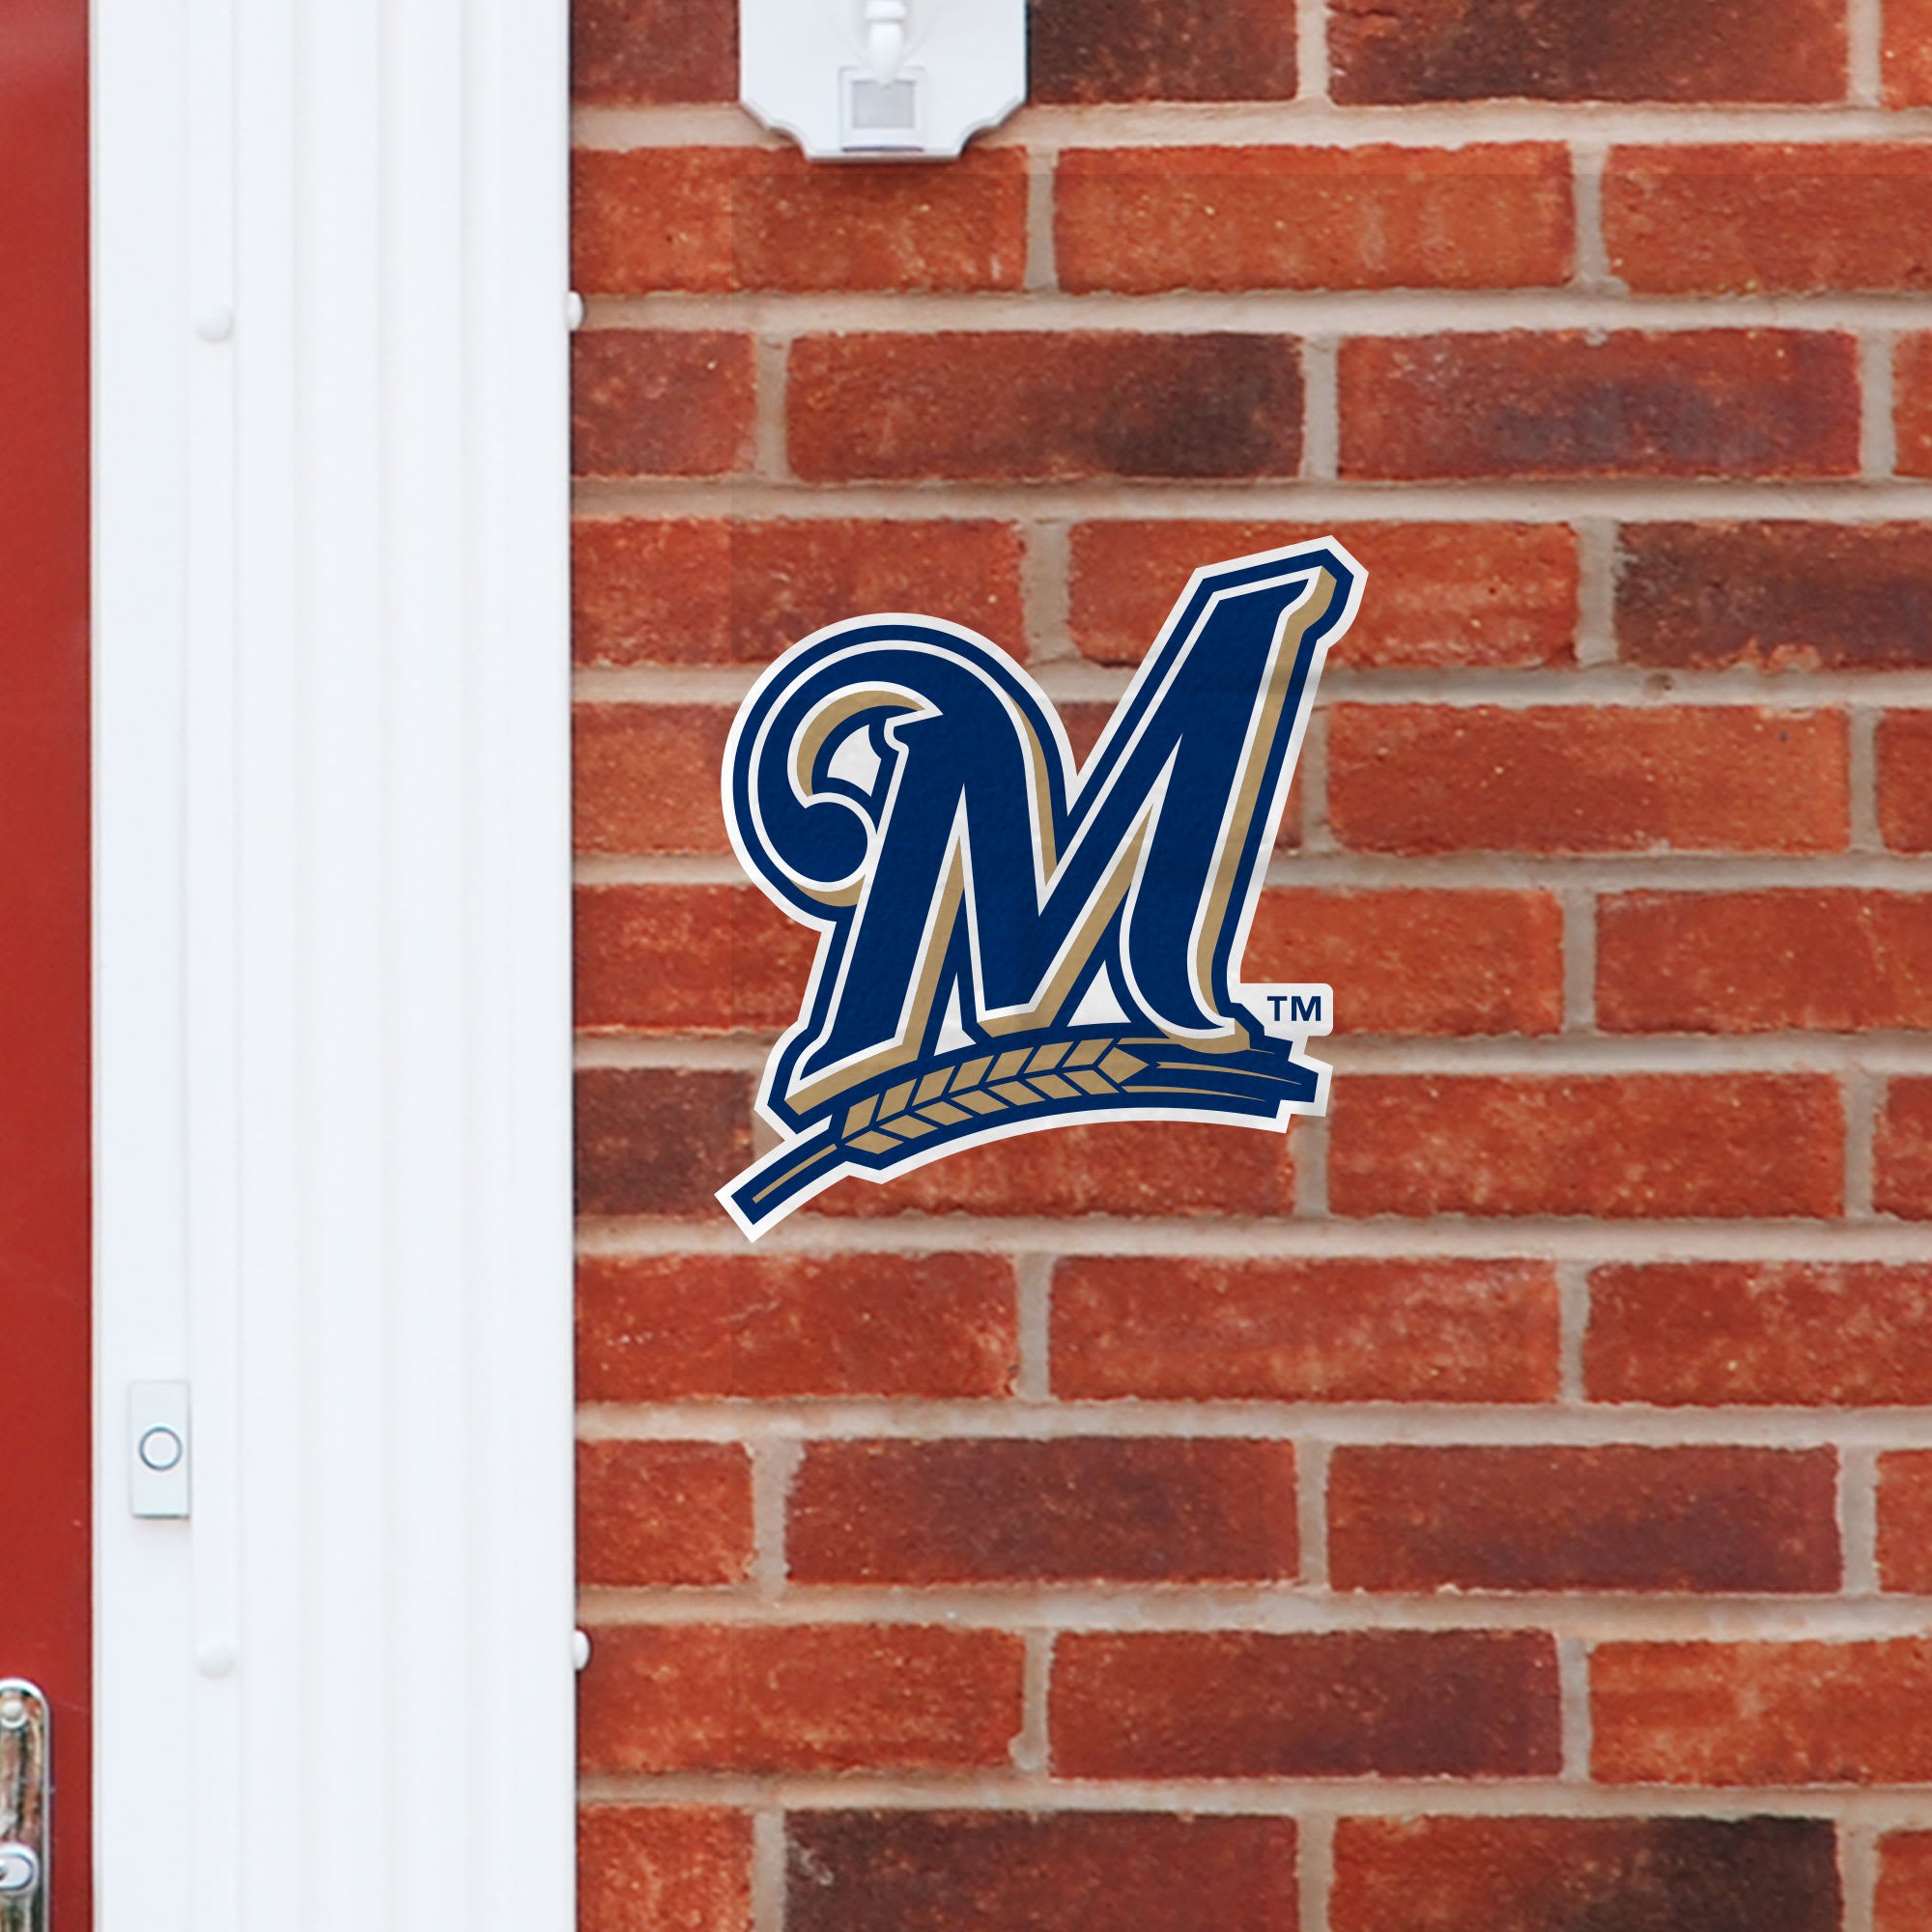 Milwaukee Brewers: Logo - Officially Licensed MLB Outdoor Graphic Large by Fathead | Wood/Aluminum